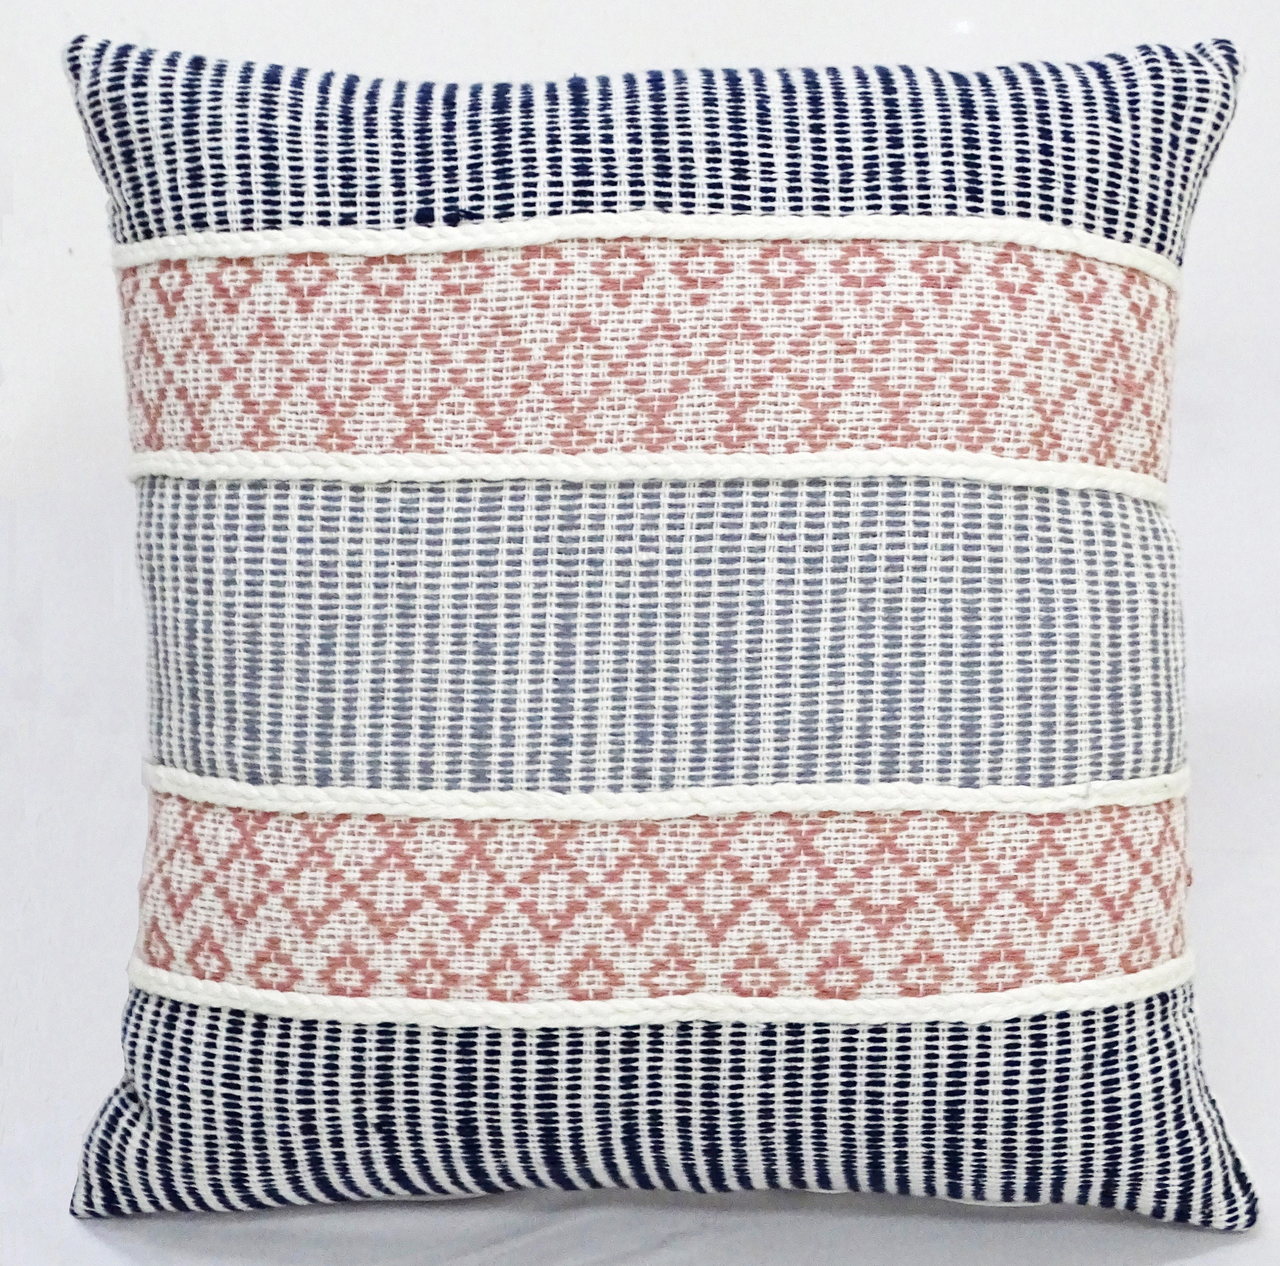 22" X 22" Decorative Throw Pillow for couch